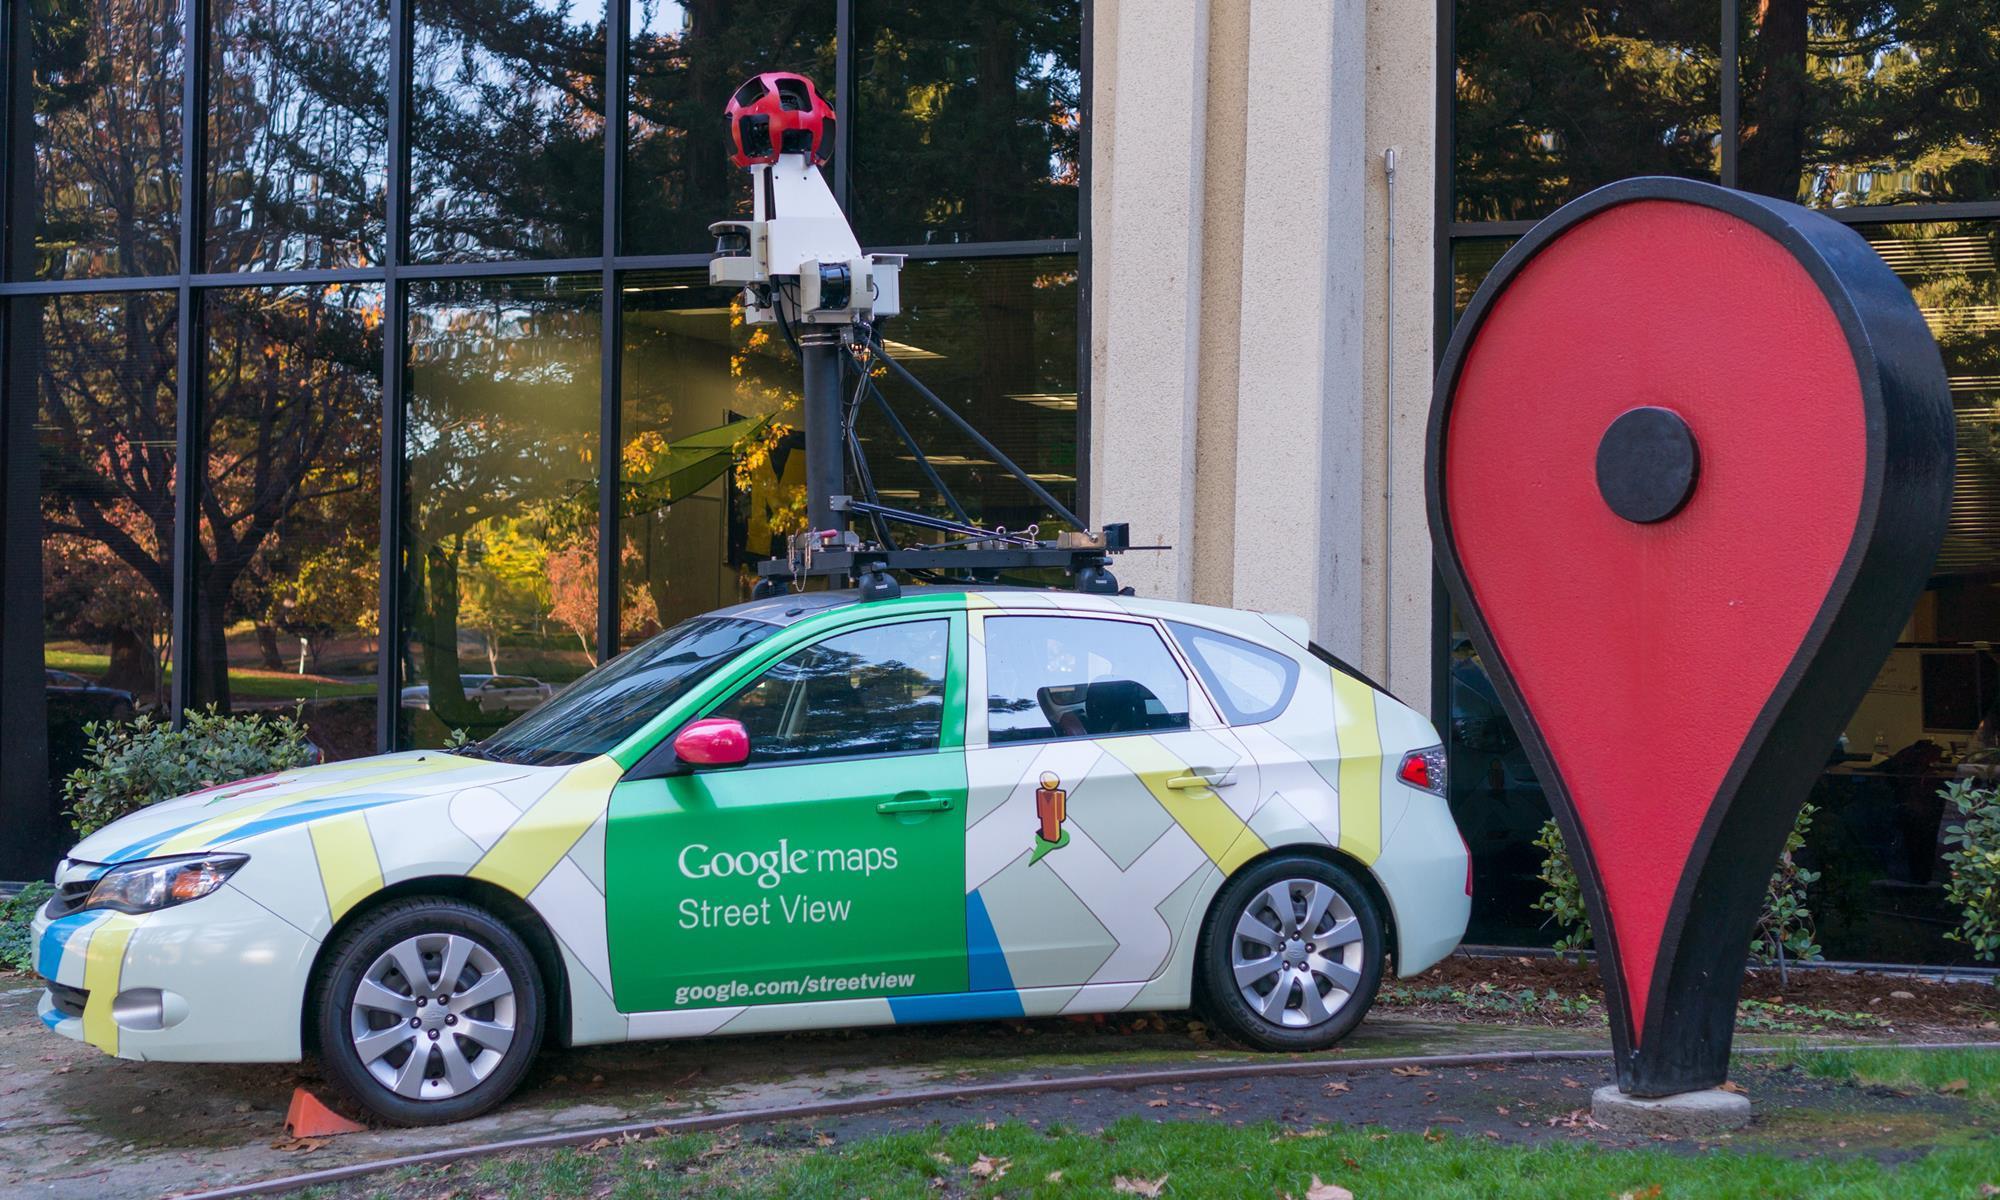 Google Street View cars map methane leaks in major US cities ... - Chemistry World (subscription)